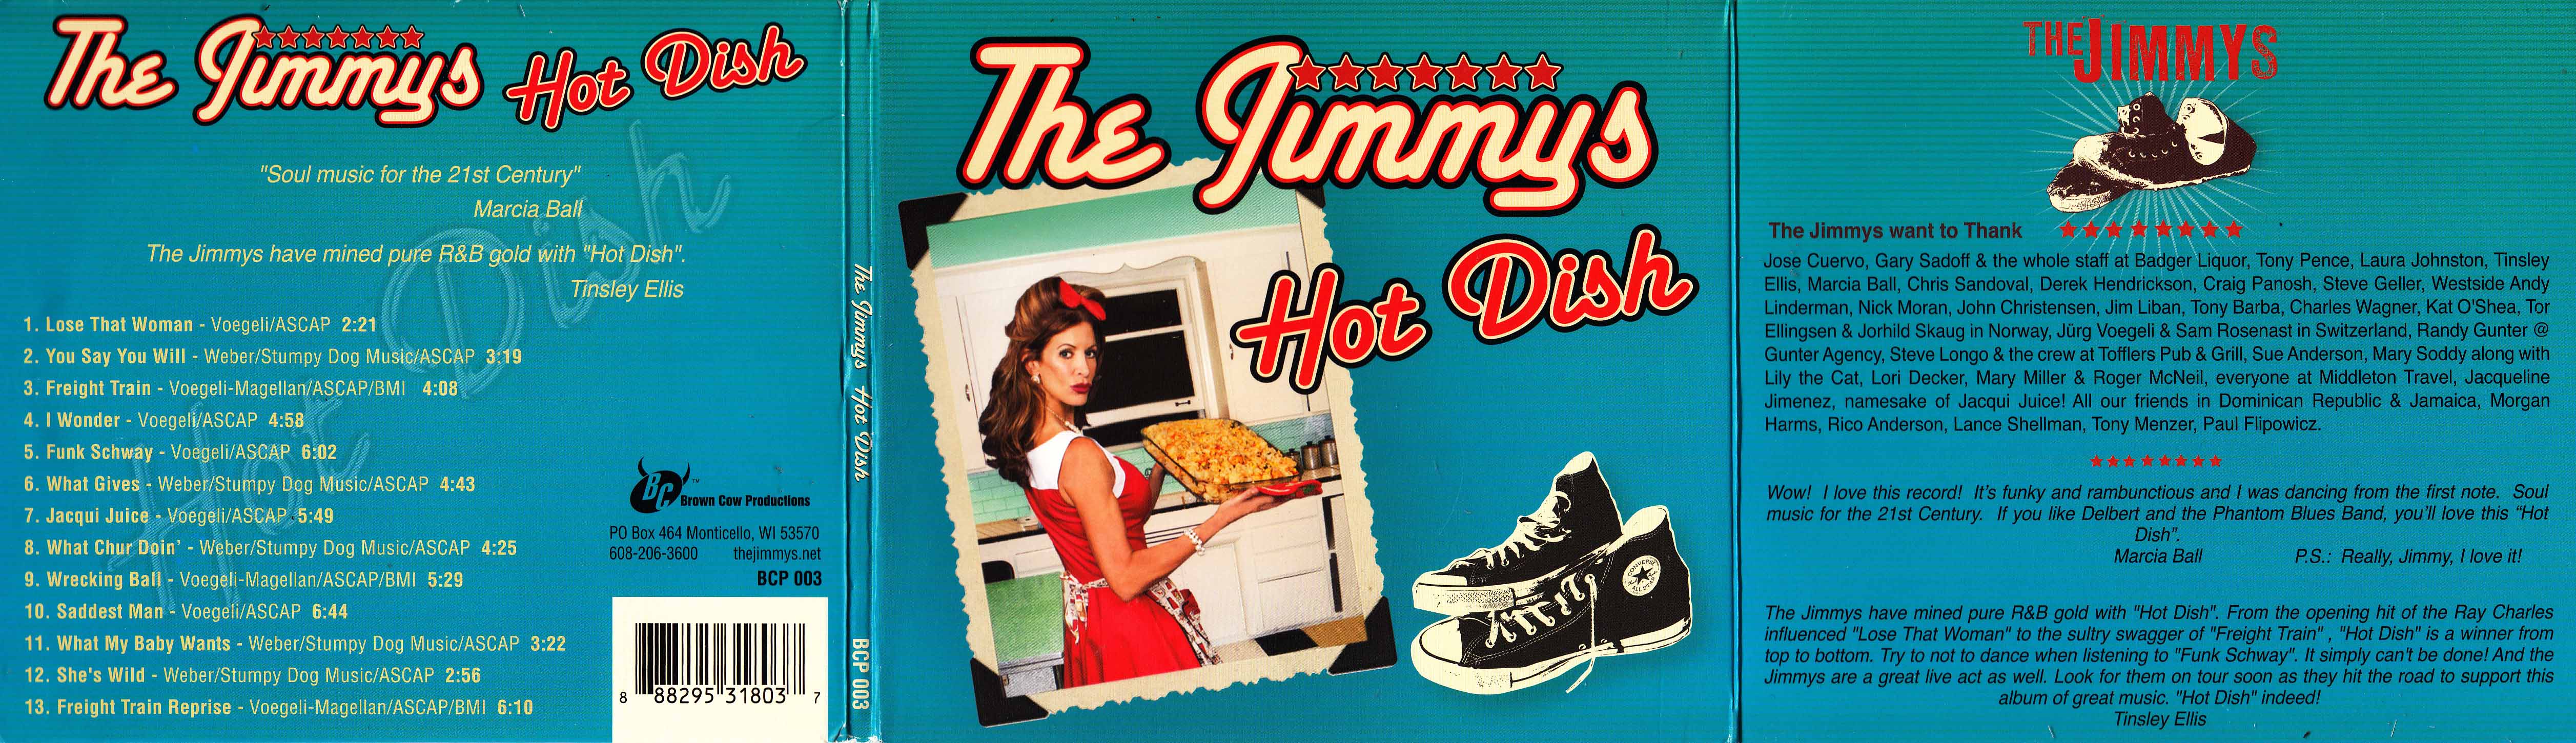 The Jimmys - Hot Dish